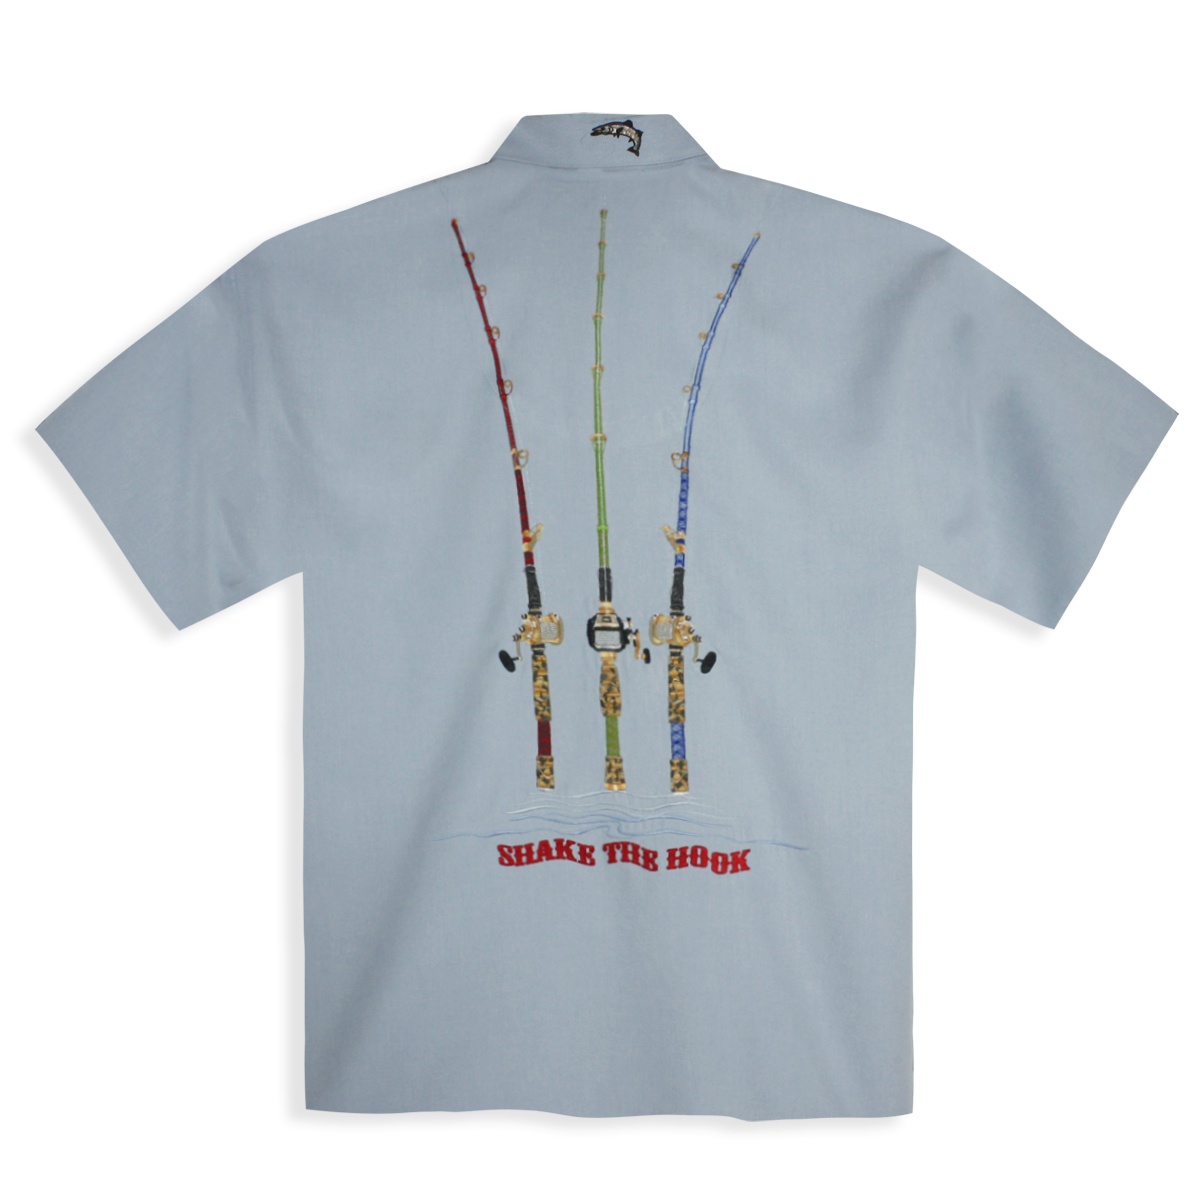 Bamboo Cay Men's Shirt - Rods and Reels/Shake the Hook -Back image